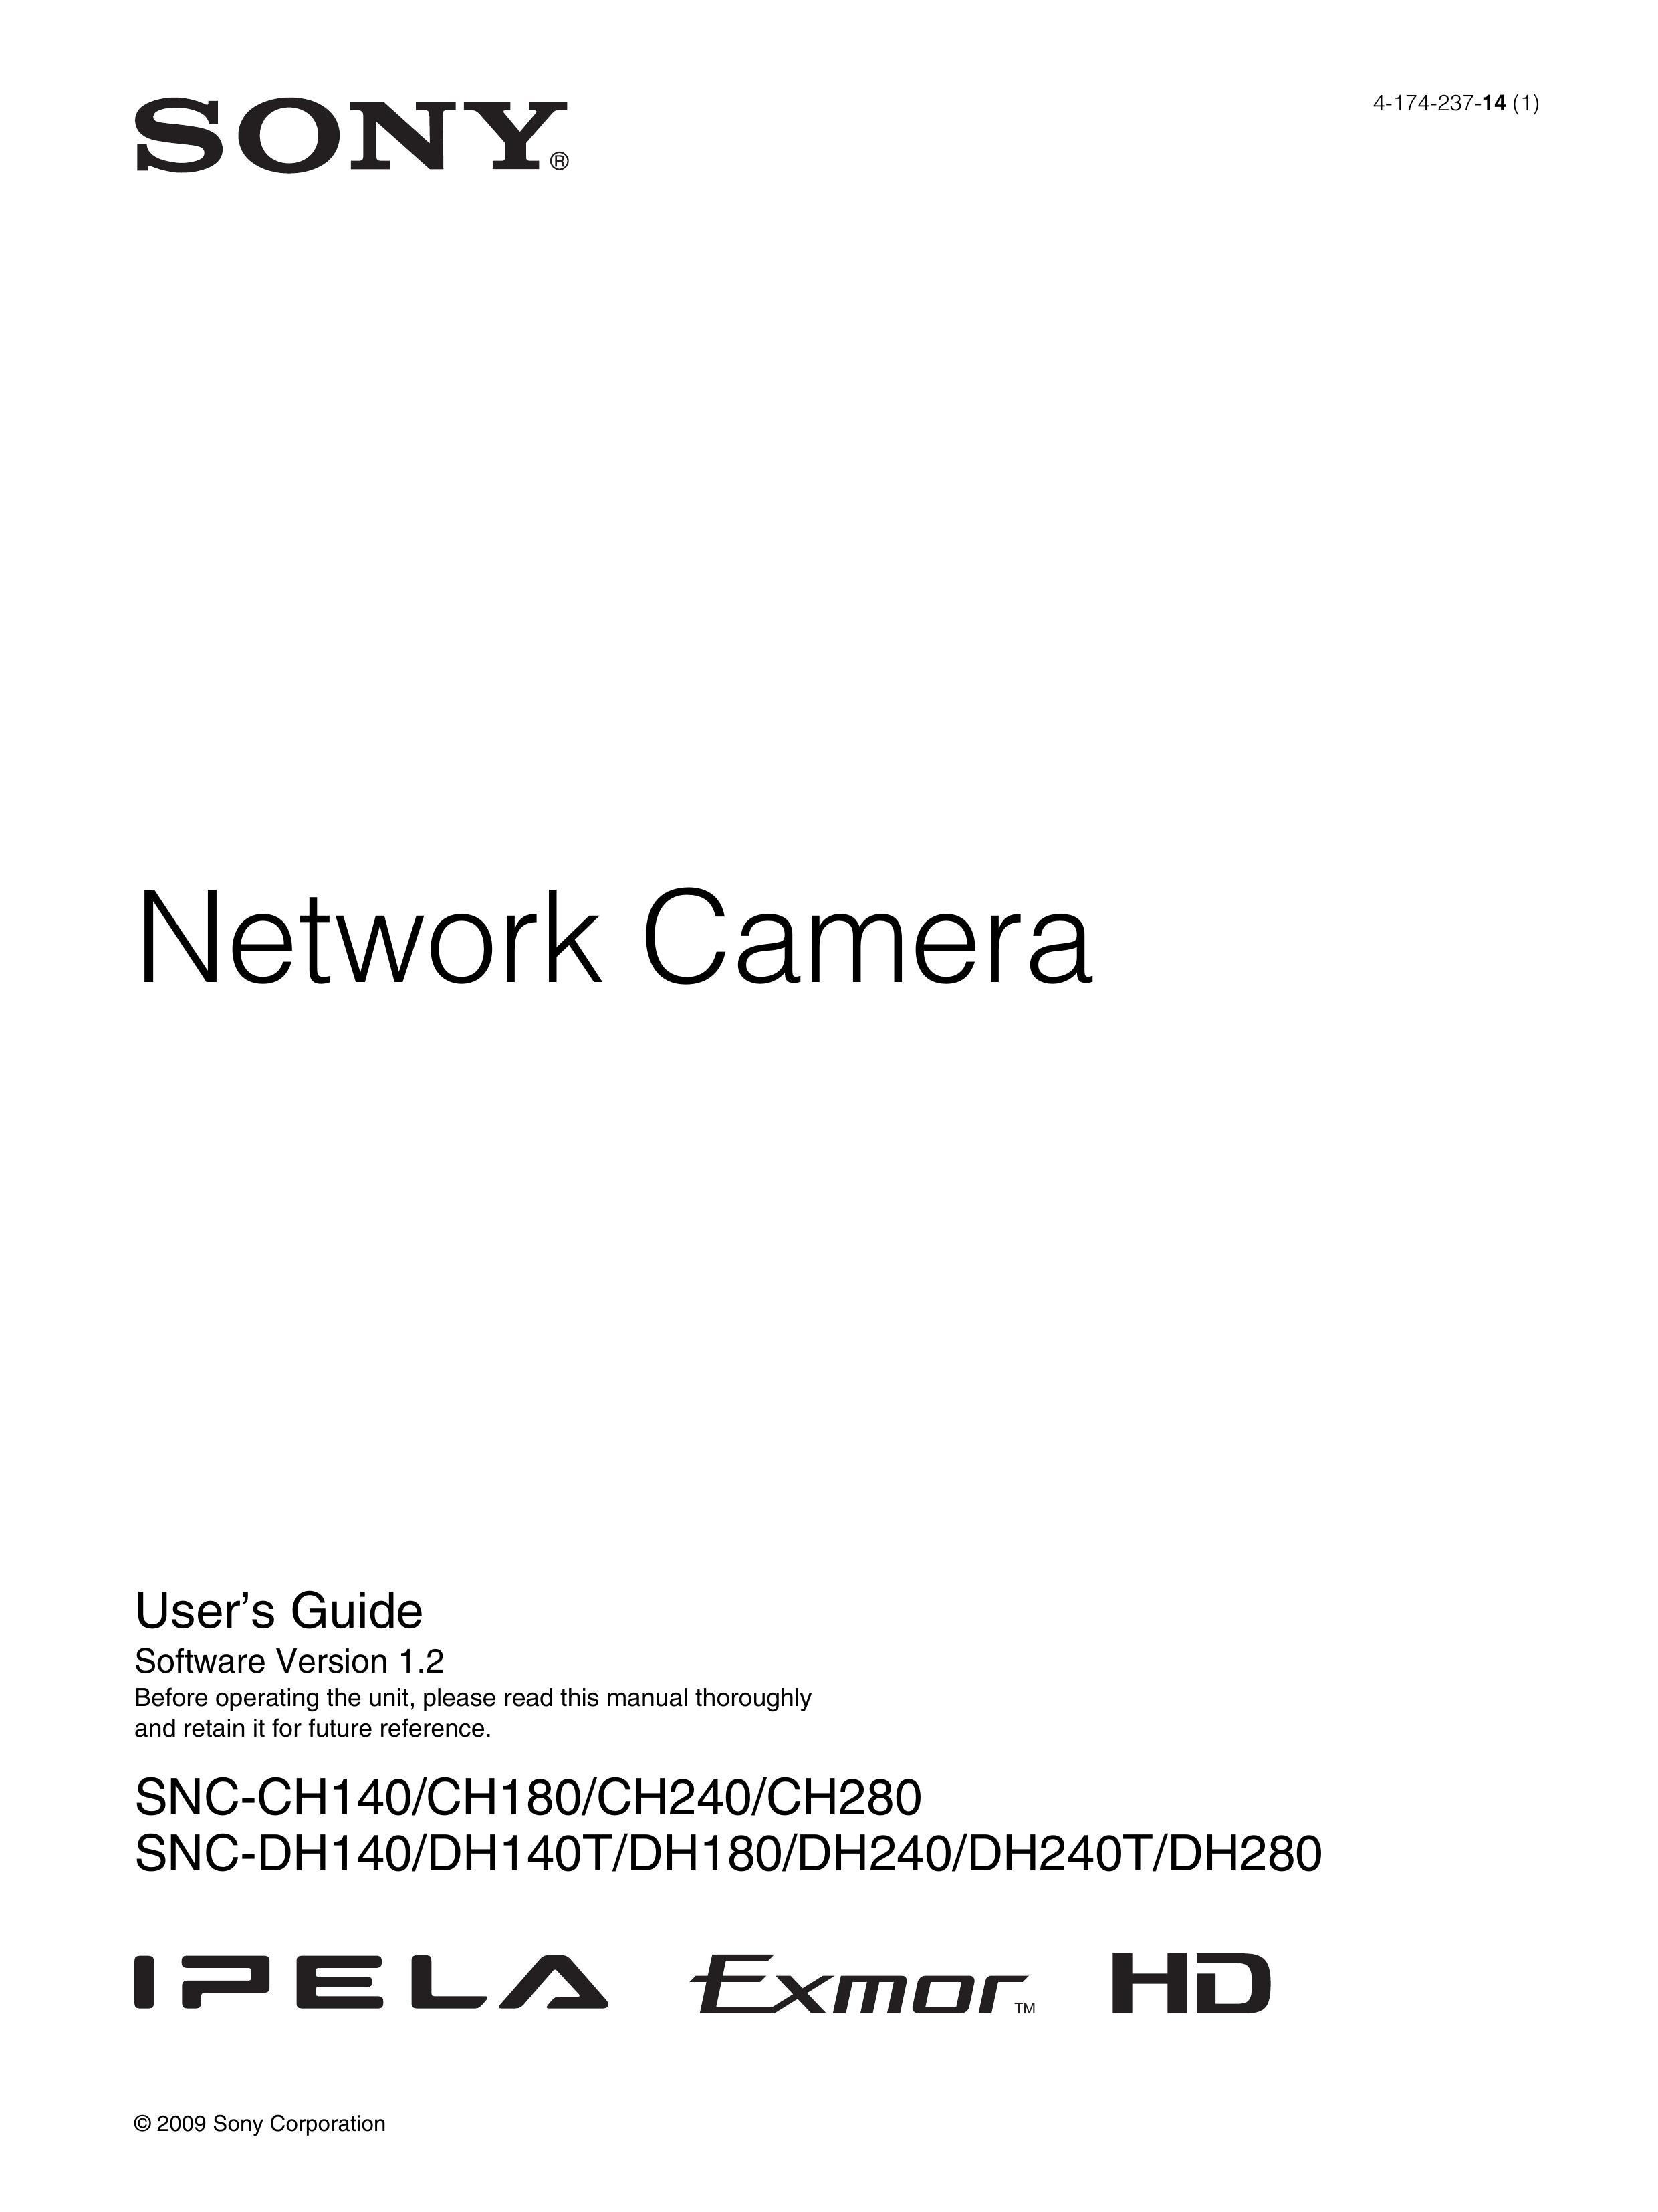 Sony DH180 Security Camera User Manual